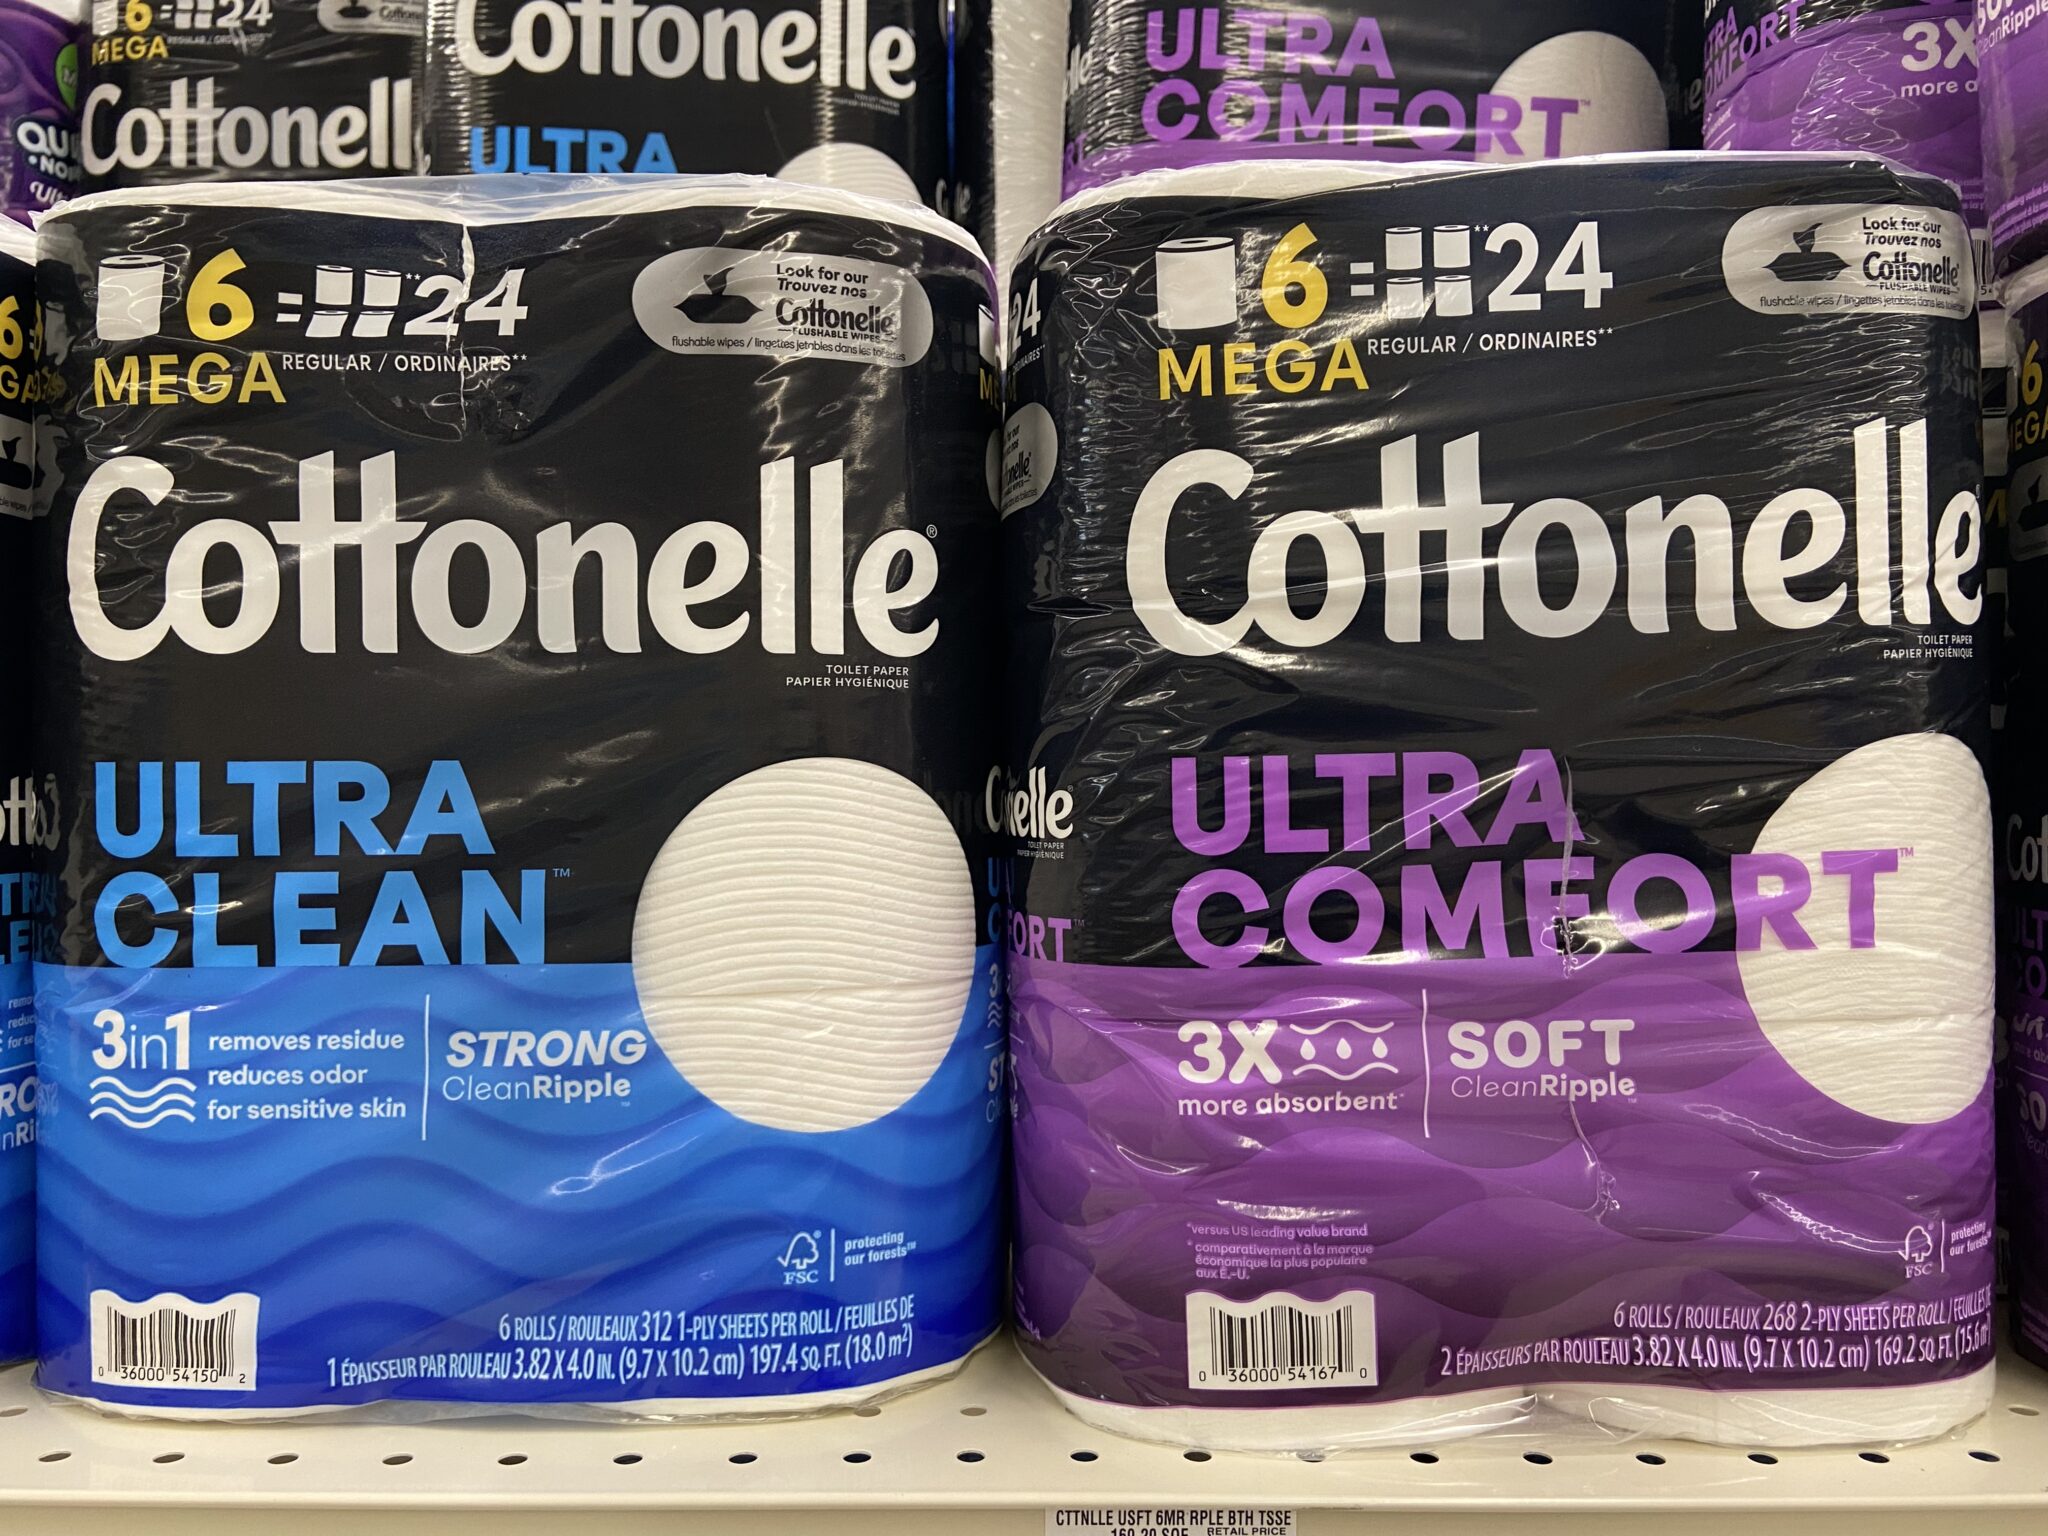 Coupon & Instant Savings Deal On Cottonelle Bath Tissue + More Deals at ShopRite Starting 4/23